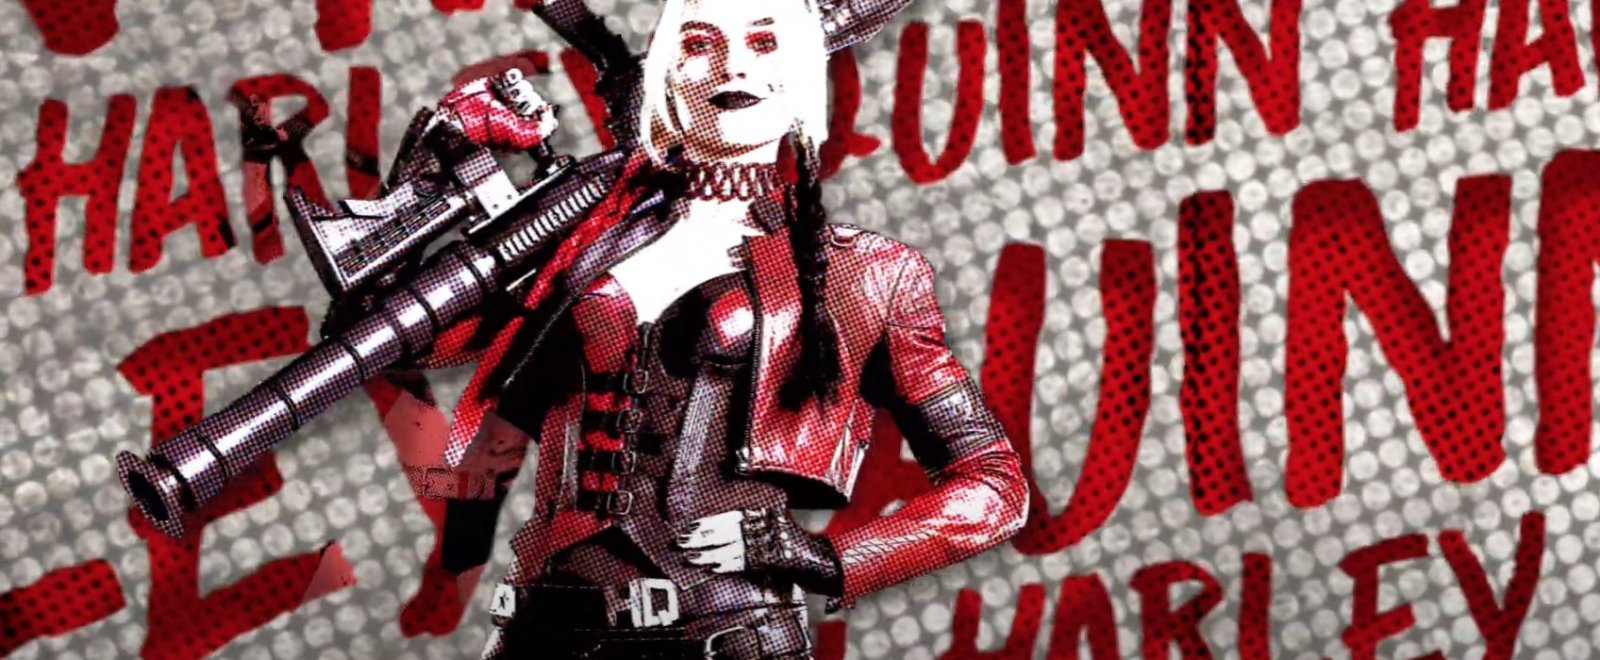 James Gunn And Margot Robbie Have ‘Discussed’ A Future Harley Quinn Project Together